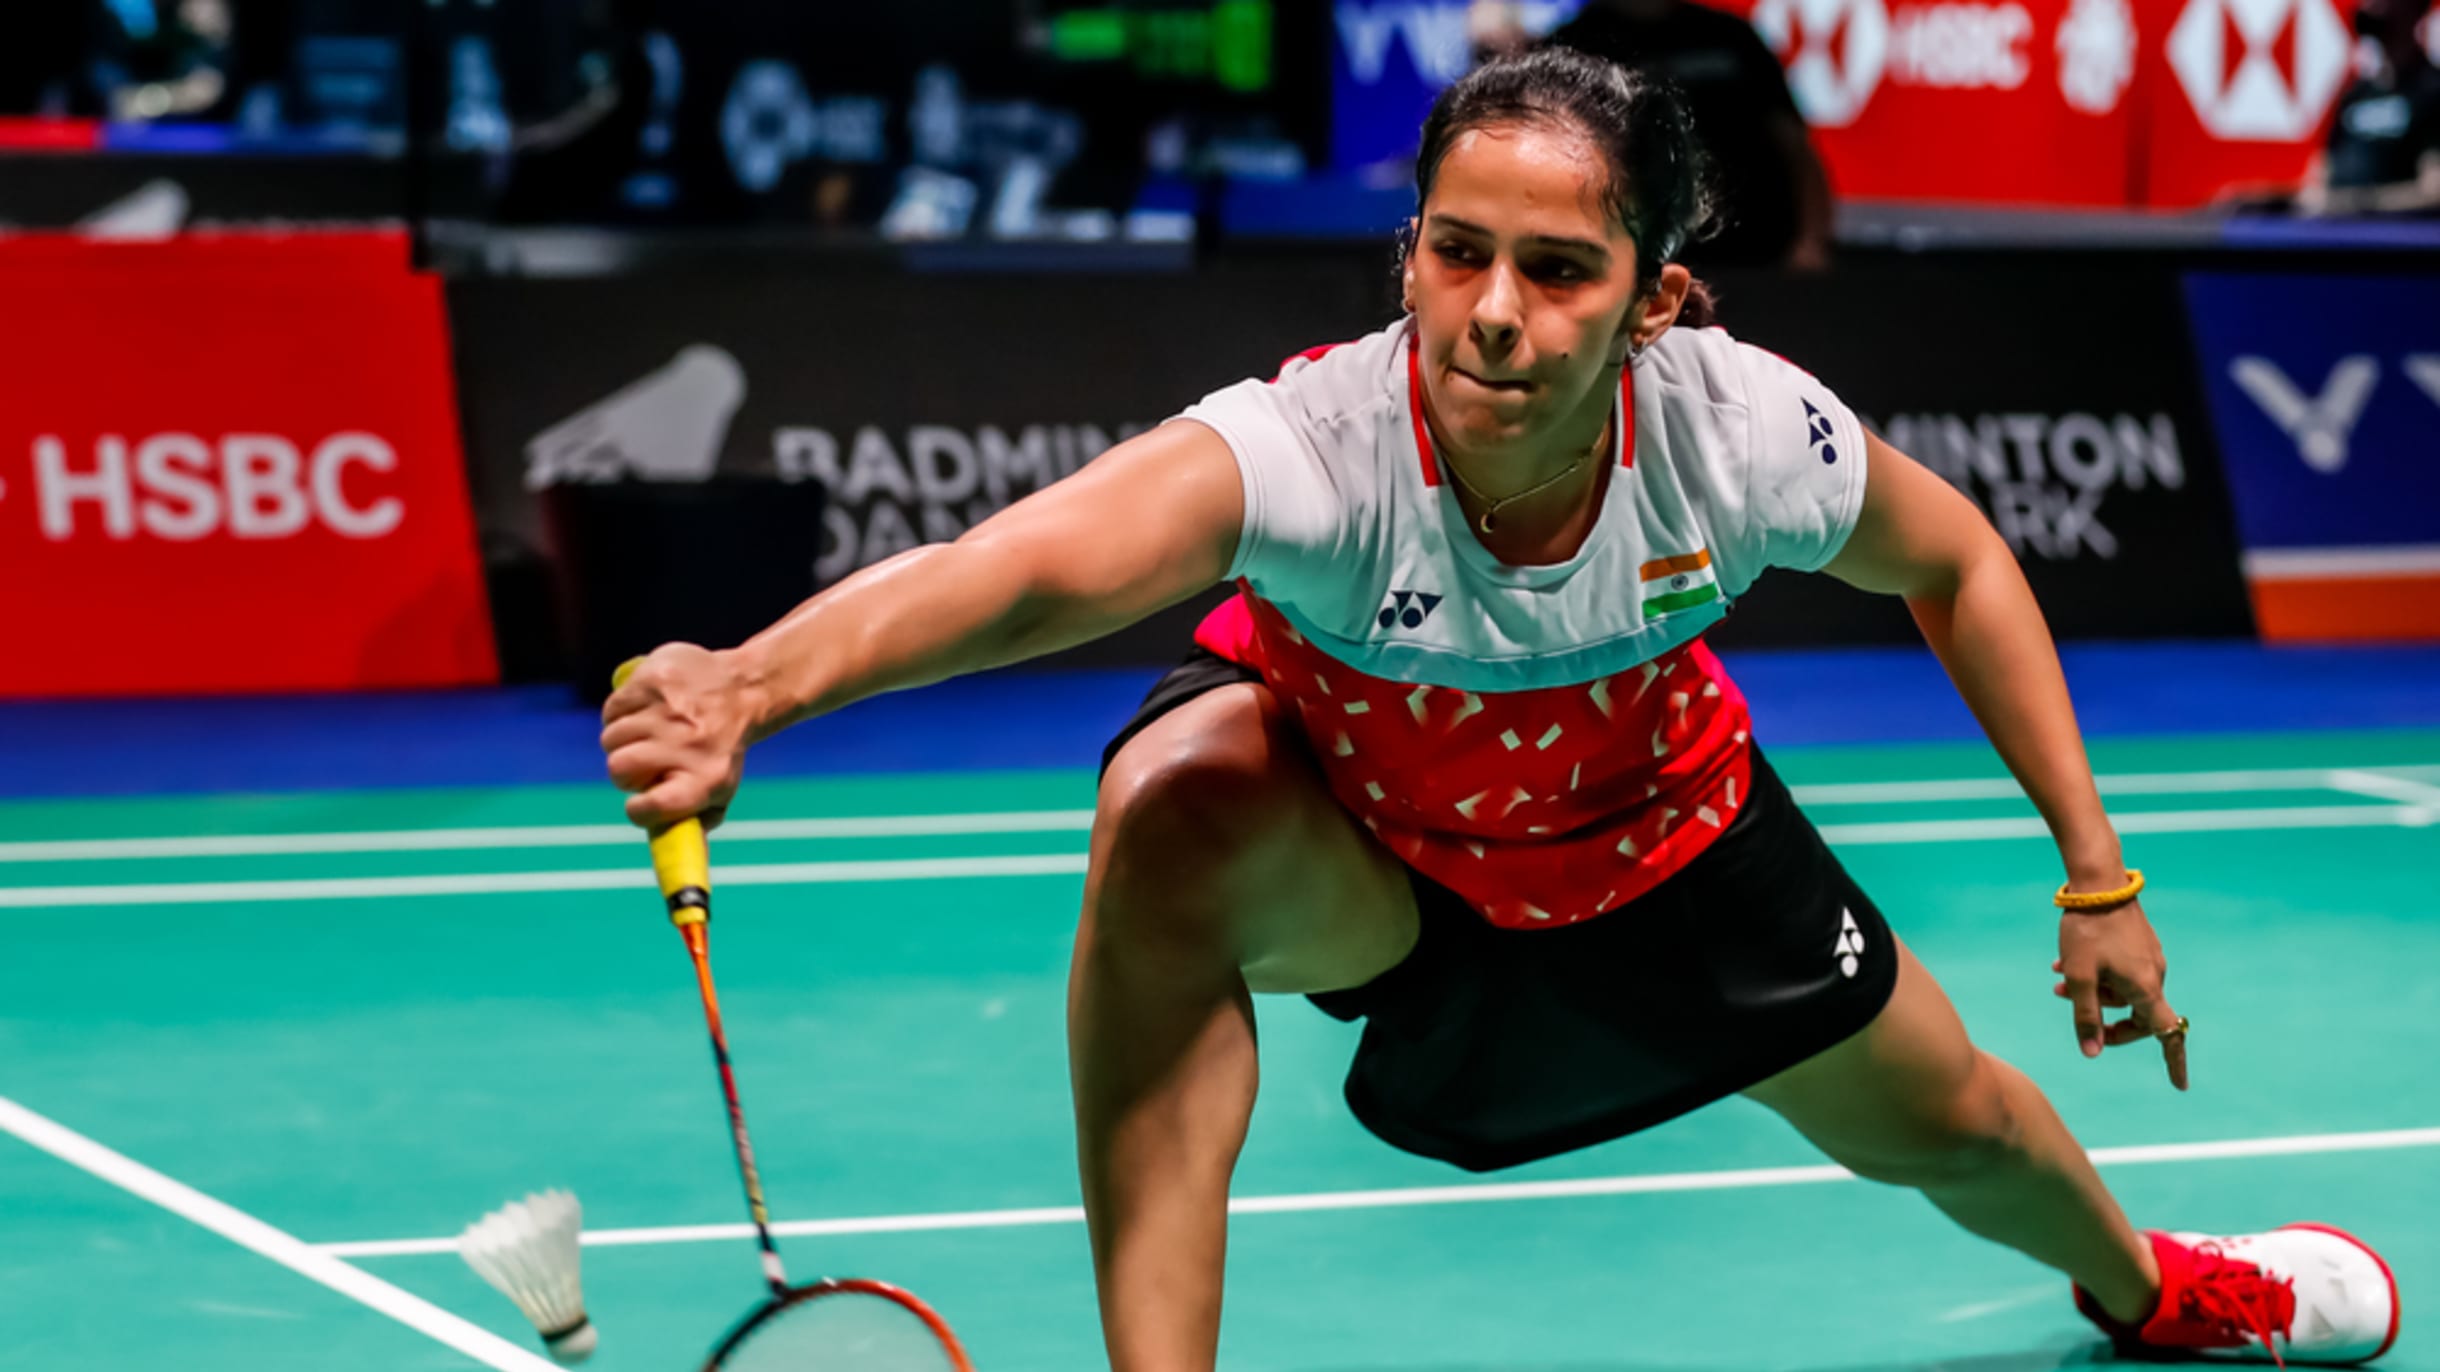 Saina Nehwal loses in opening round at Denmark Open 2021